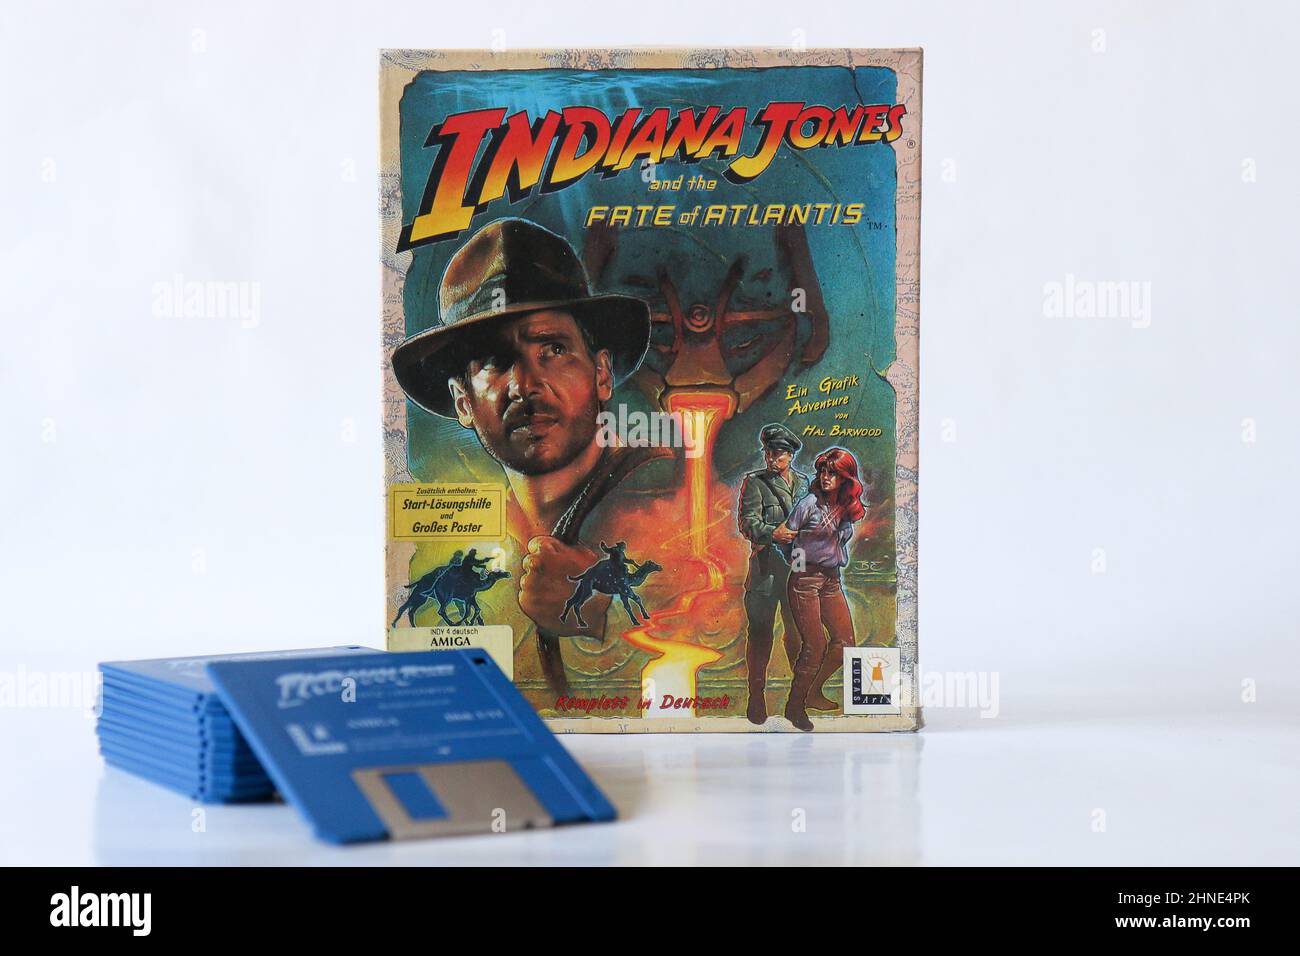 BERLIN - FEBRUARY 12, 2022: Vintage Retro Video Game INDIANA JONES AND THE FATE OF ATLANTIS for the Commodore Amiga on Floppy Disks. Lucas Arts releas Stock Photo